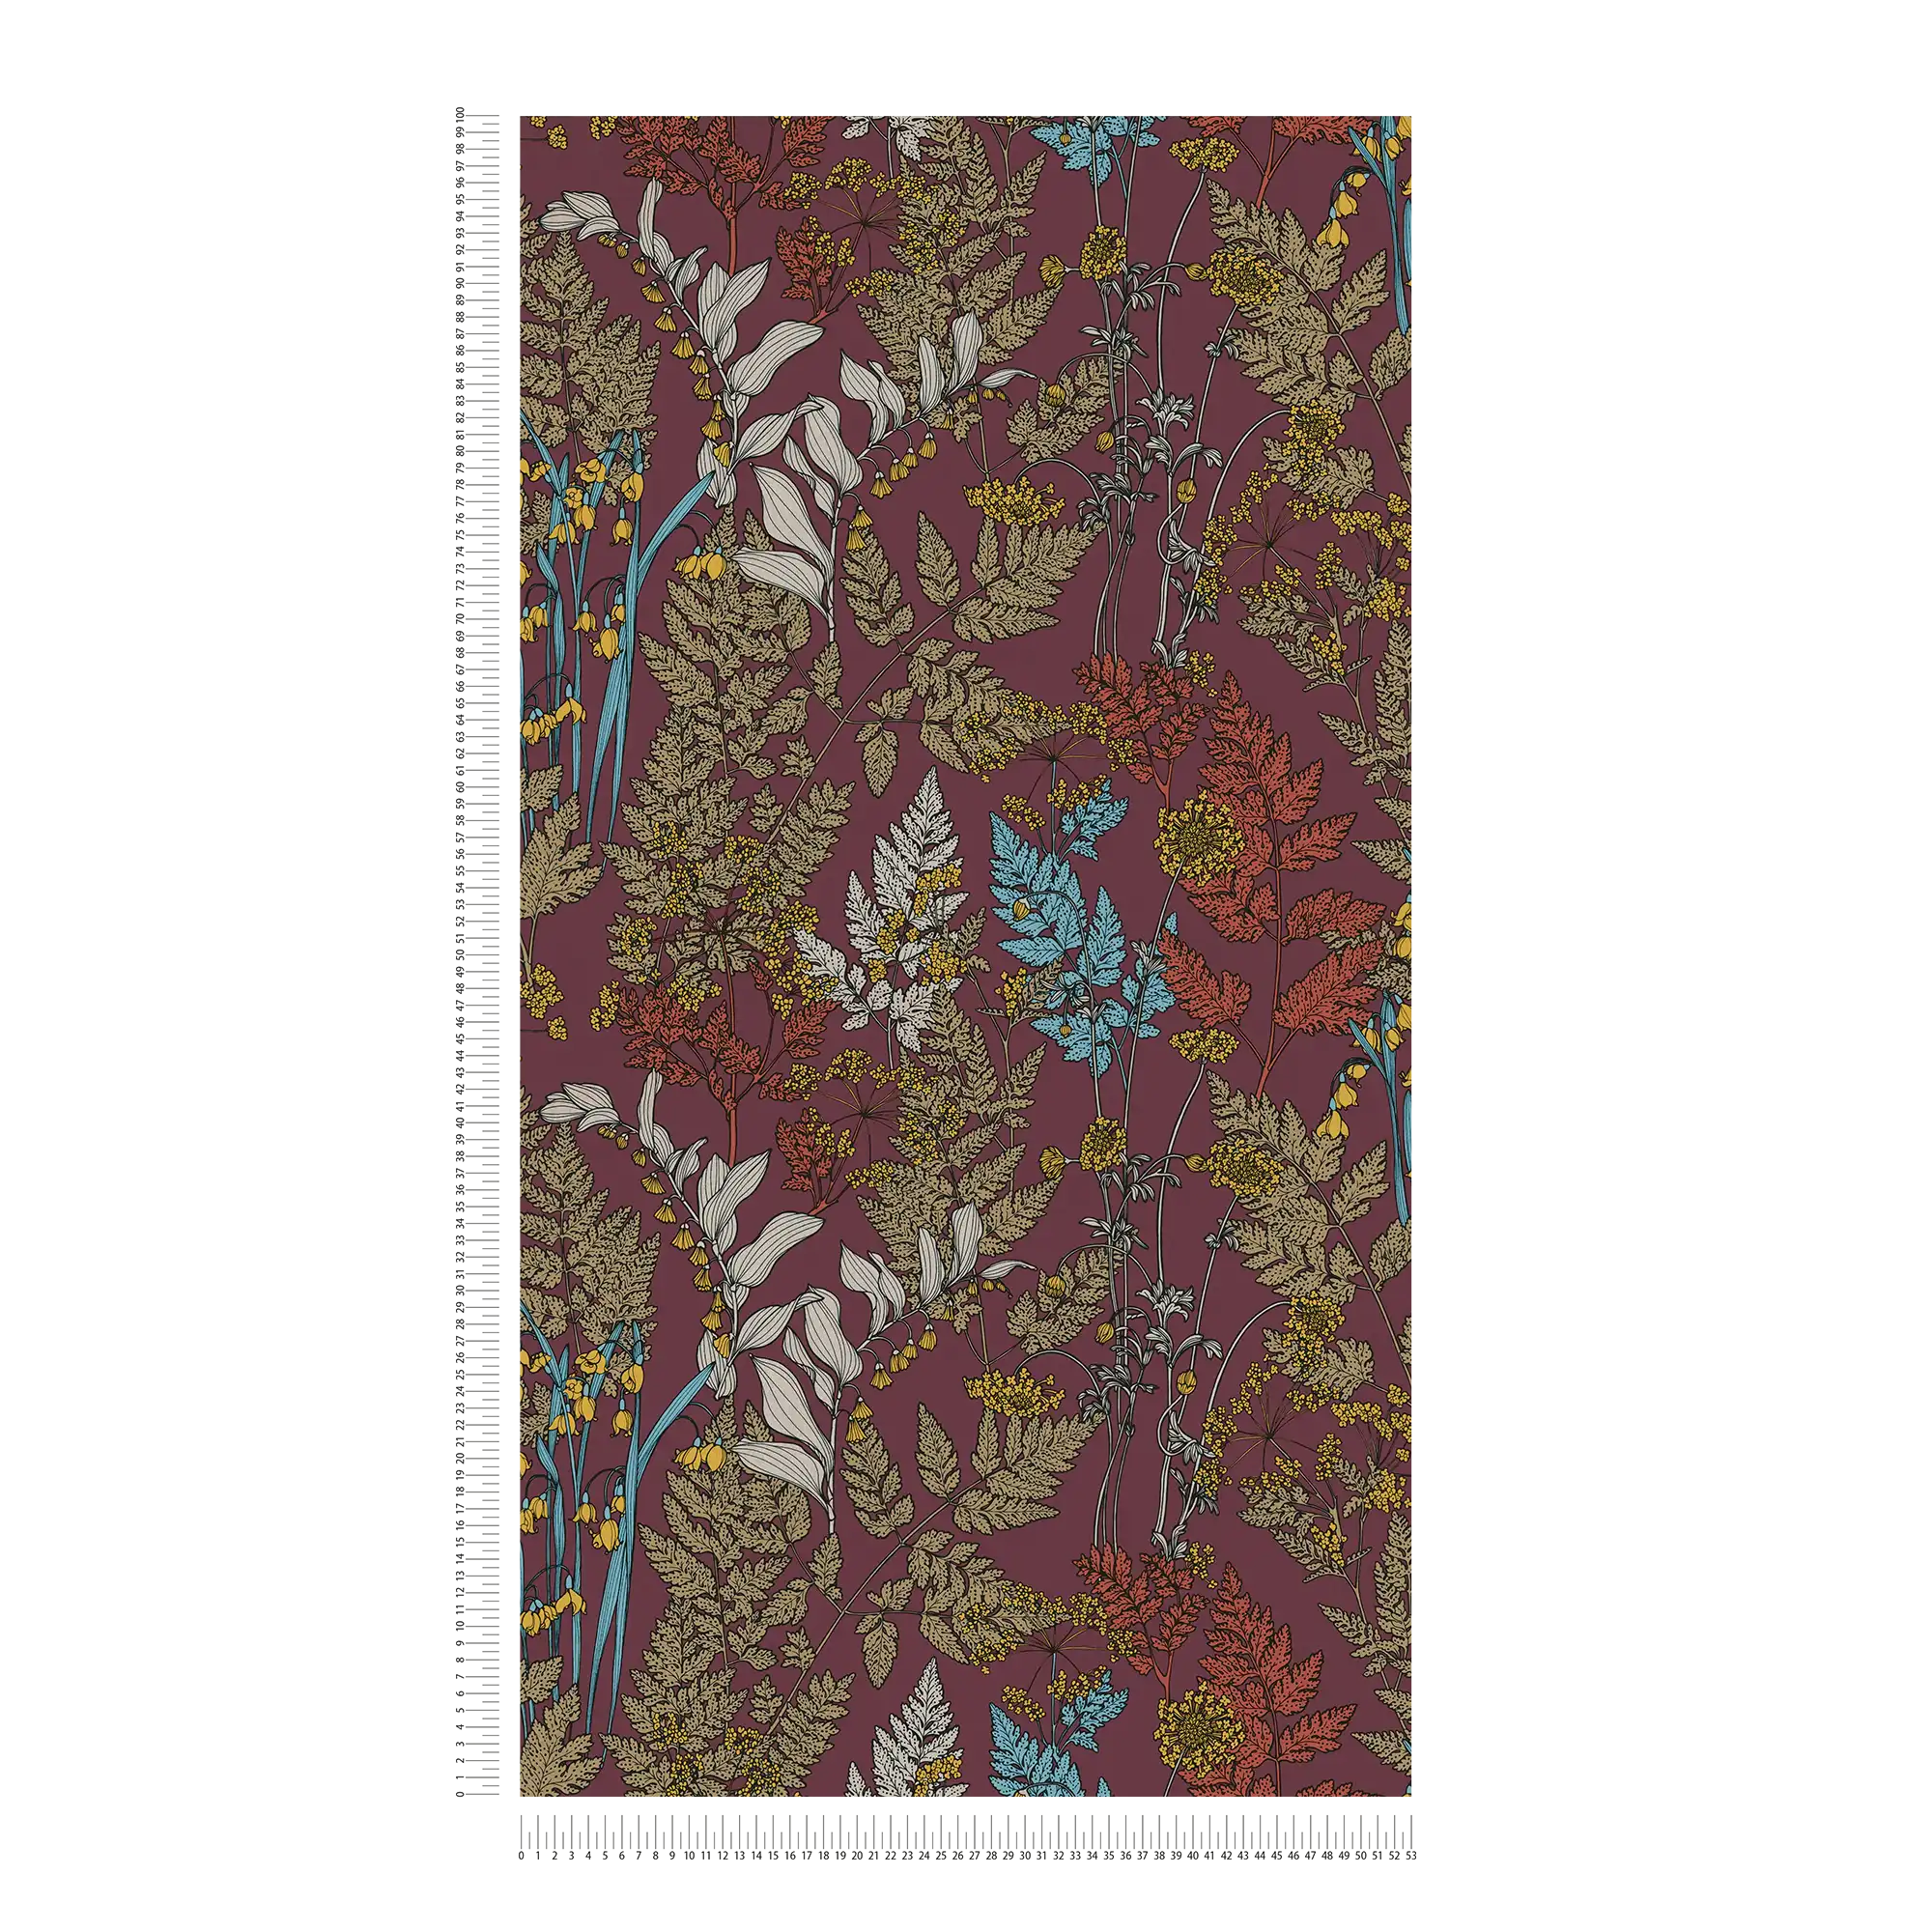             Purple wallpaper with colourful leaves & flowers design - red, yellow, blue
        